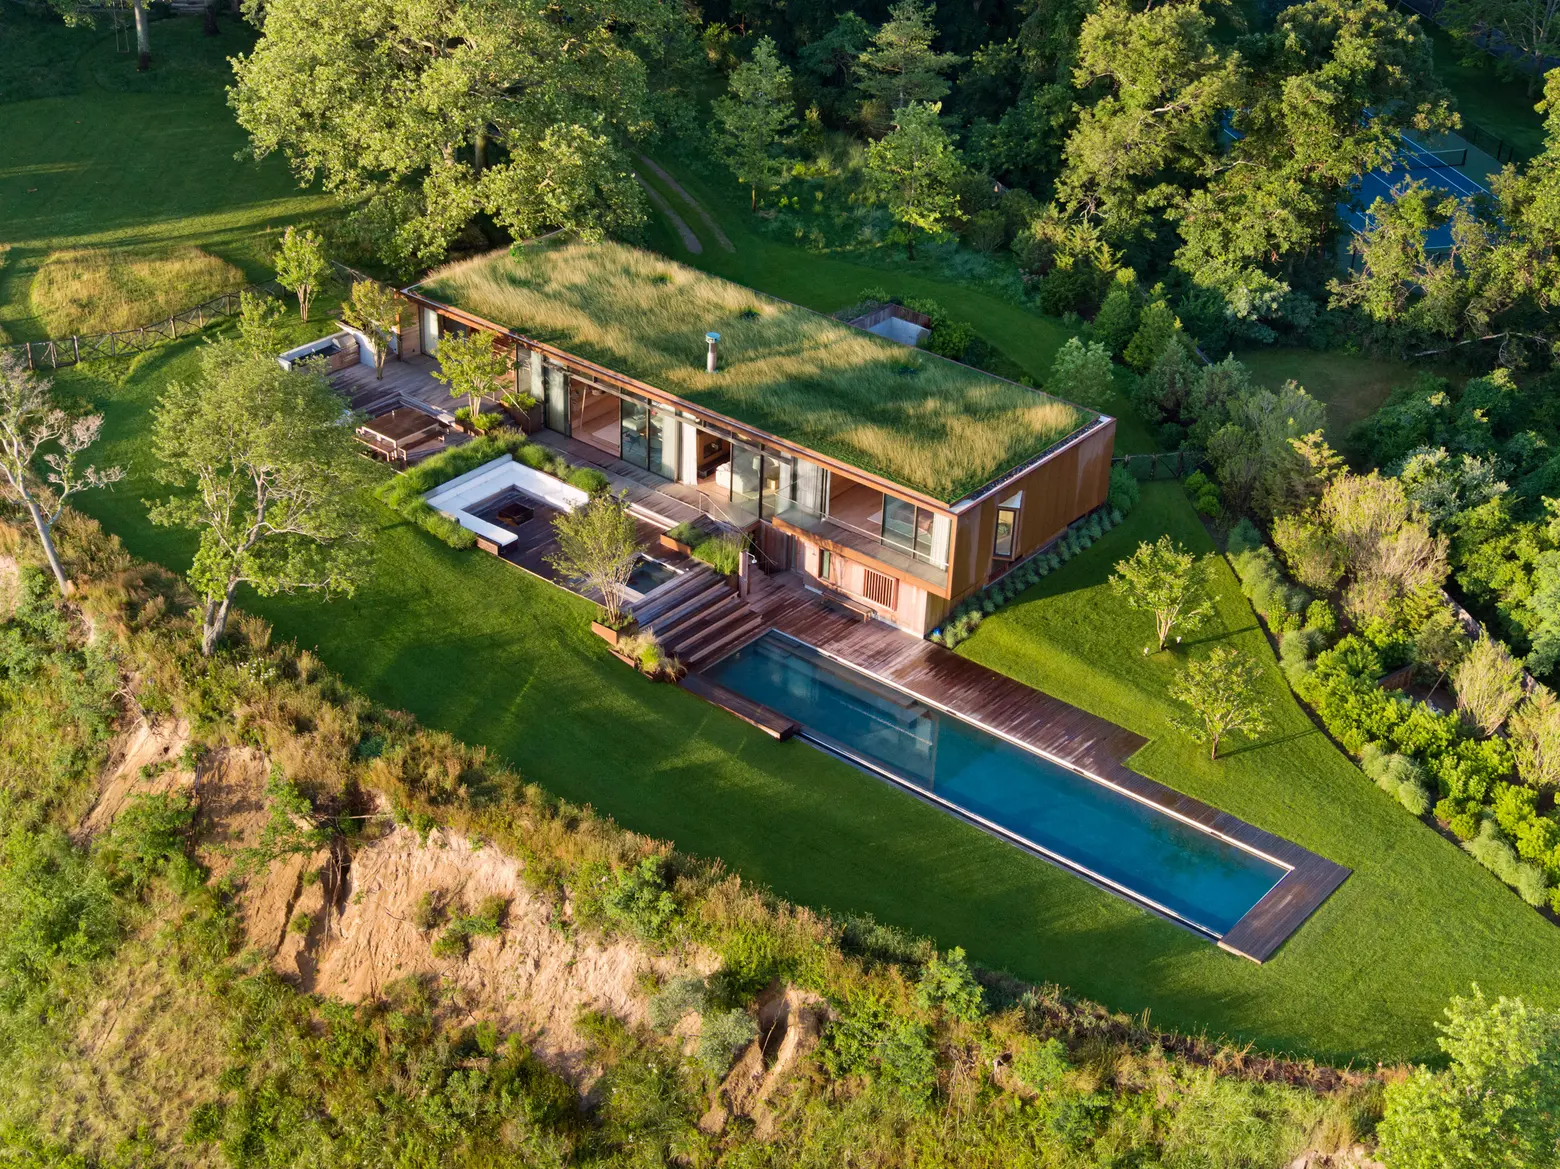 At this five-acre Hamptons getaway, a grass roof and infinity pool camouflage with the landscape